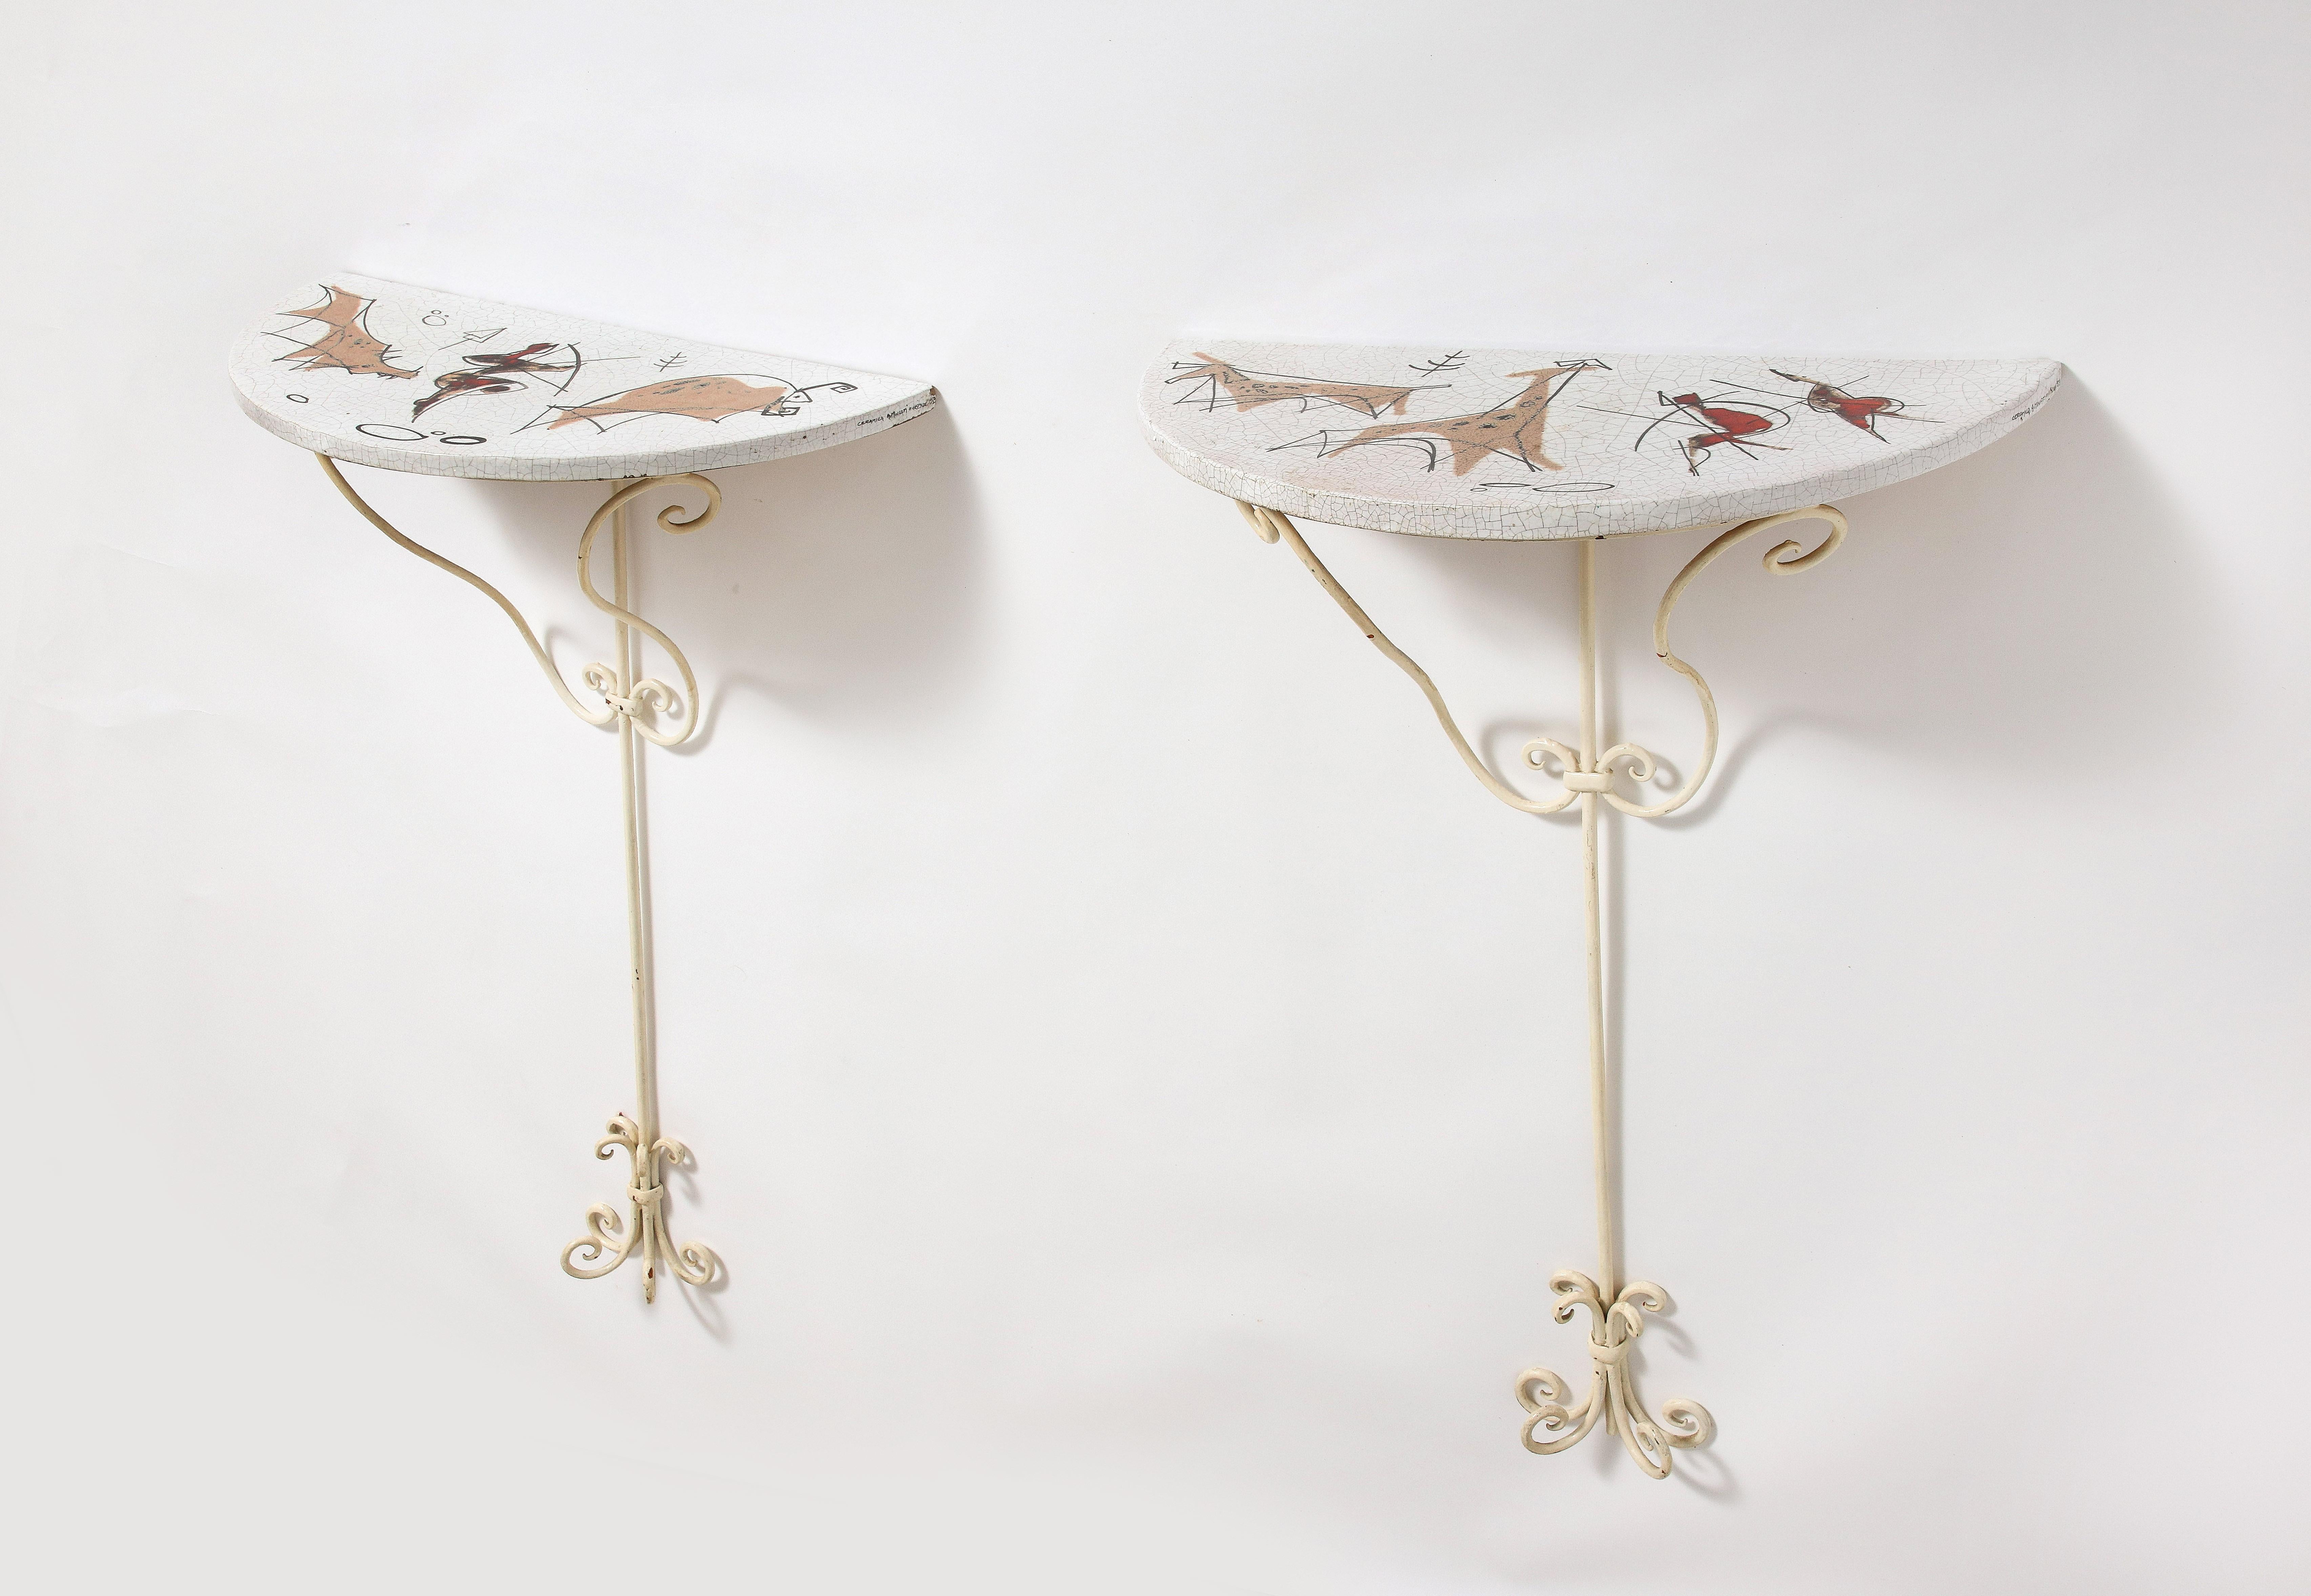 Arnaldo Miniati Pair of Ceramic and Iron Demi-Lune Wall Consoles, Italy, 1959 For Sale 10